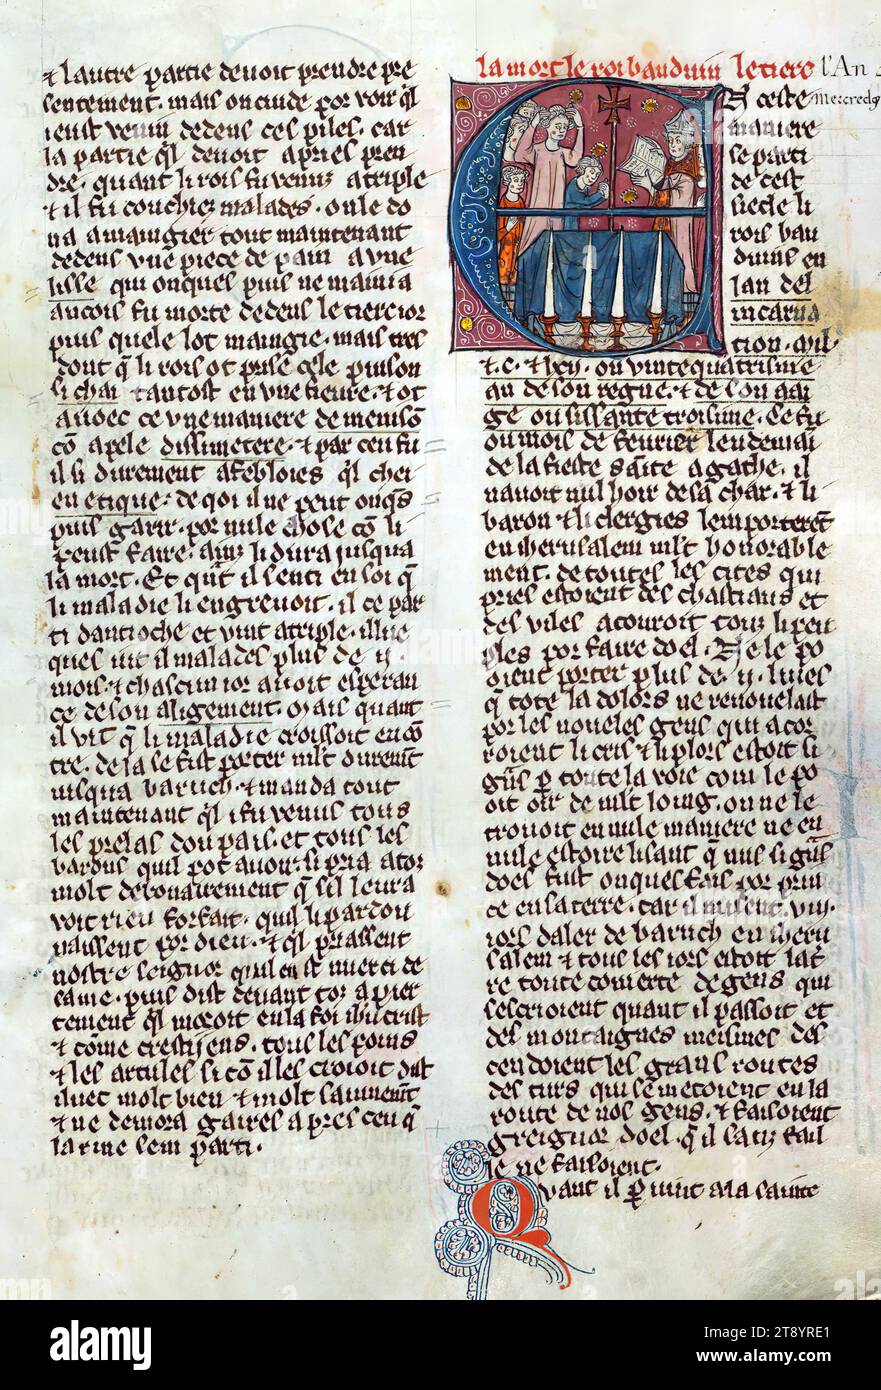 William of Tyre's Histoire d'Outre Mer, Initial 'E' with the funeral service of King Baldwin III, This manuscript, completed in the later part of the thirteenth century, contains William of Tyre's Estoire d'Eracles (to 1229), Les Faits des Romains (continuation, Tiberius to Julian), and a letter of Prester John. While the origin of the manuscript is debatable between Acre and Paris, Jaroslav Folda suggests a strong connection with Epinal 45, a manuscript known to have been created in Paris during this same time Stock Photo